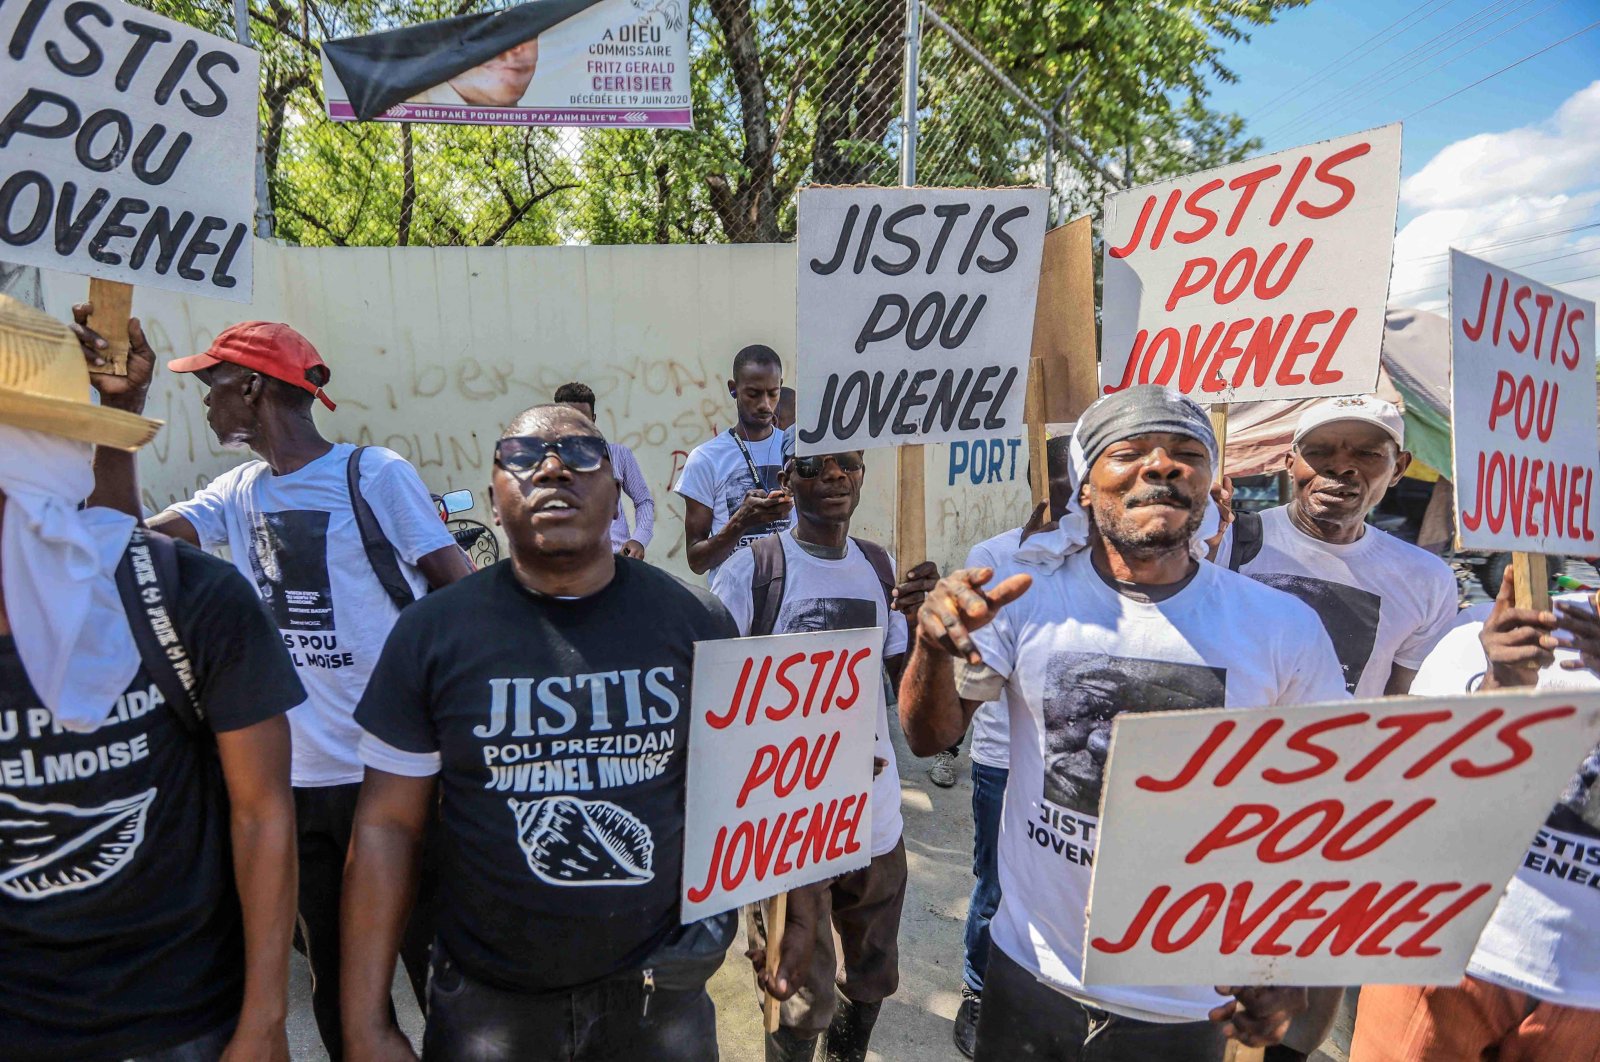 A group of activists demands justice for former Haitian President Jovenel Moise, as Martine Moise is interviewed as a witness by the judge investigating his assassination in Port-au-Prince, Haiti, Oct. 6, 2021. (AFP Photo)